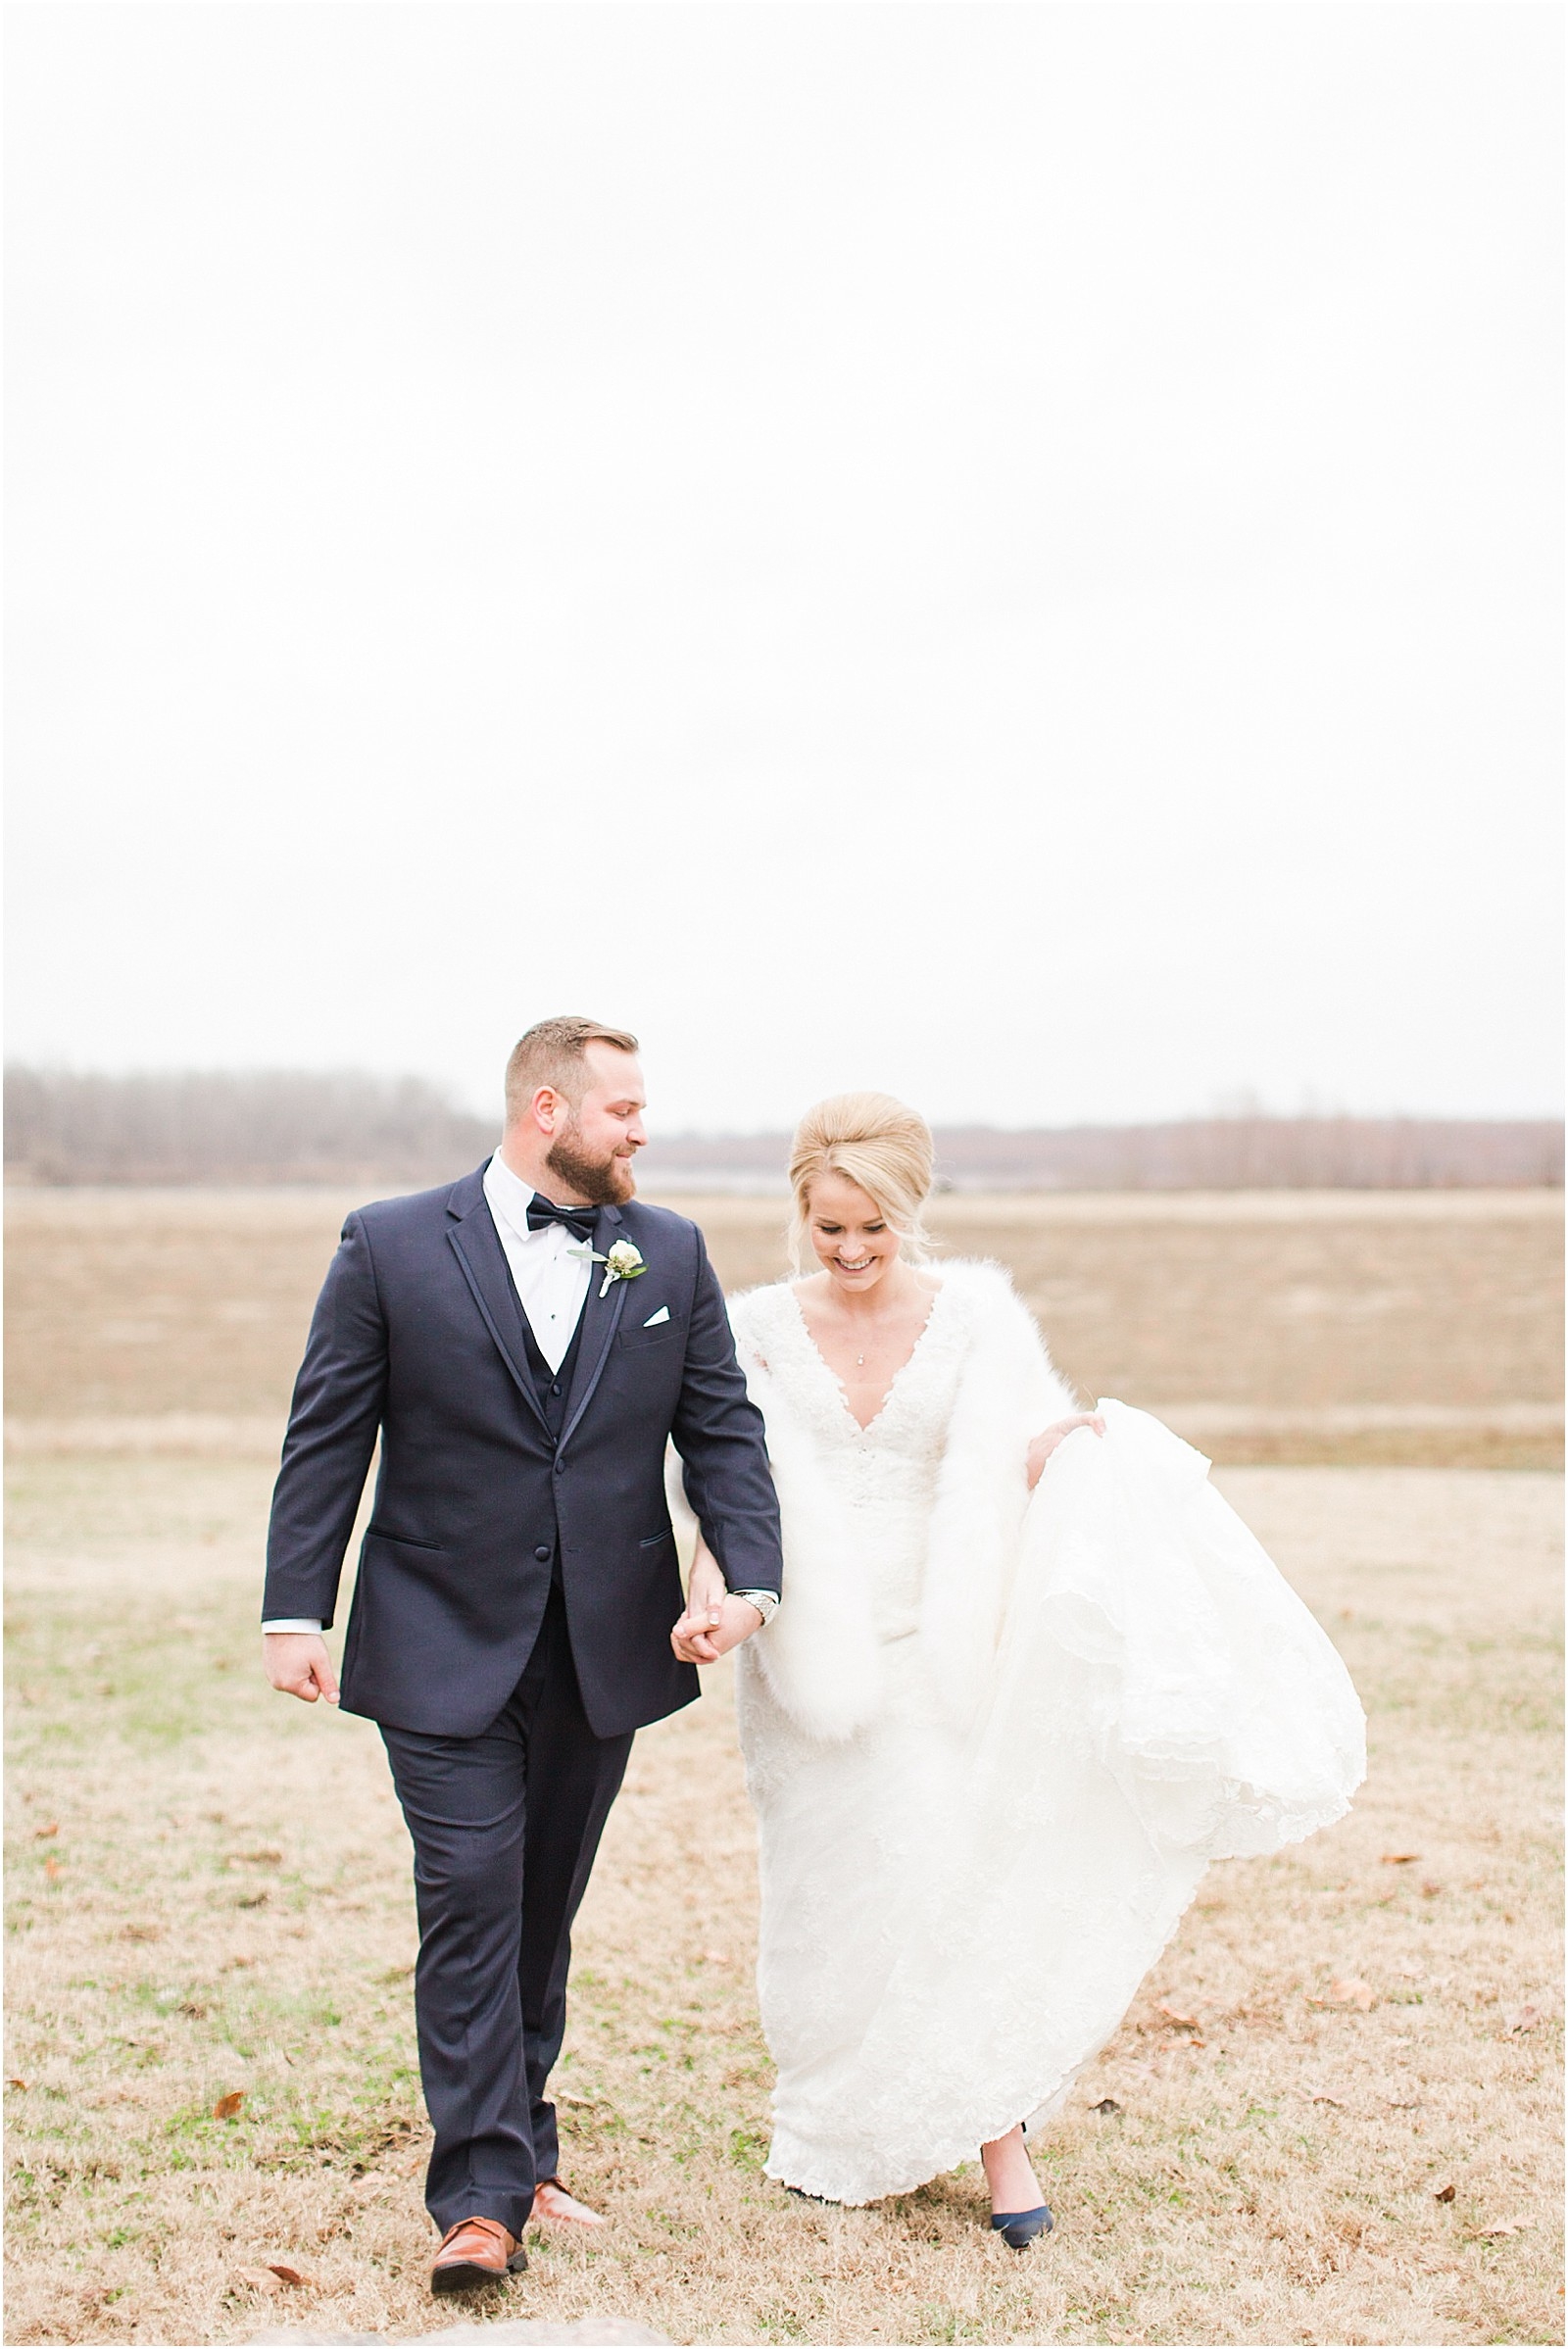 A Classic Winter Wedding in New Harmony | Rachel and Ryan | Bret and Brandie Photography 0104.jpg